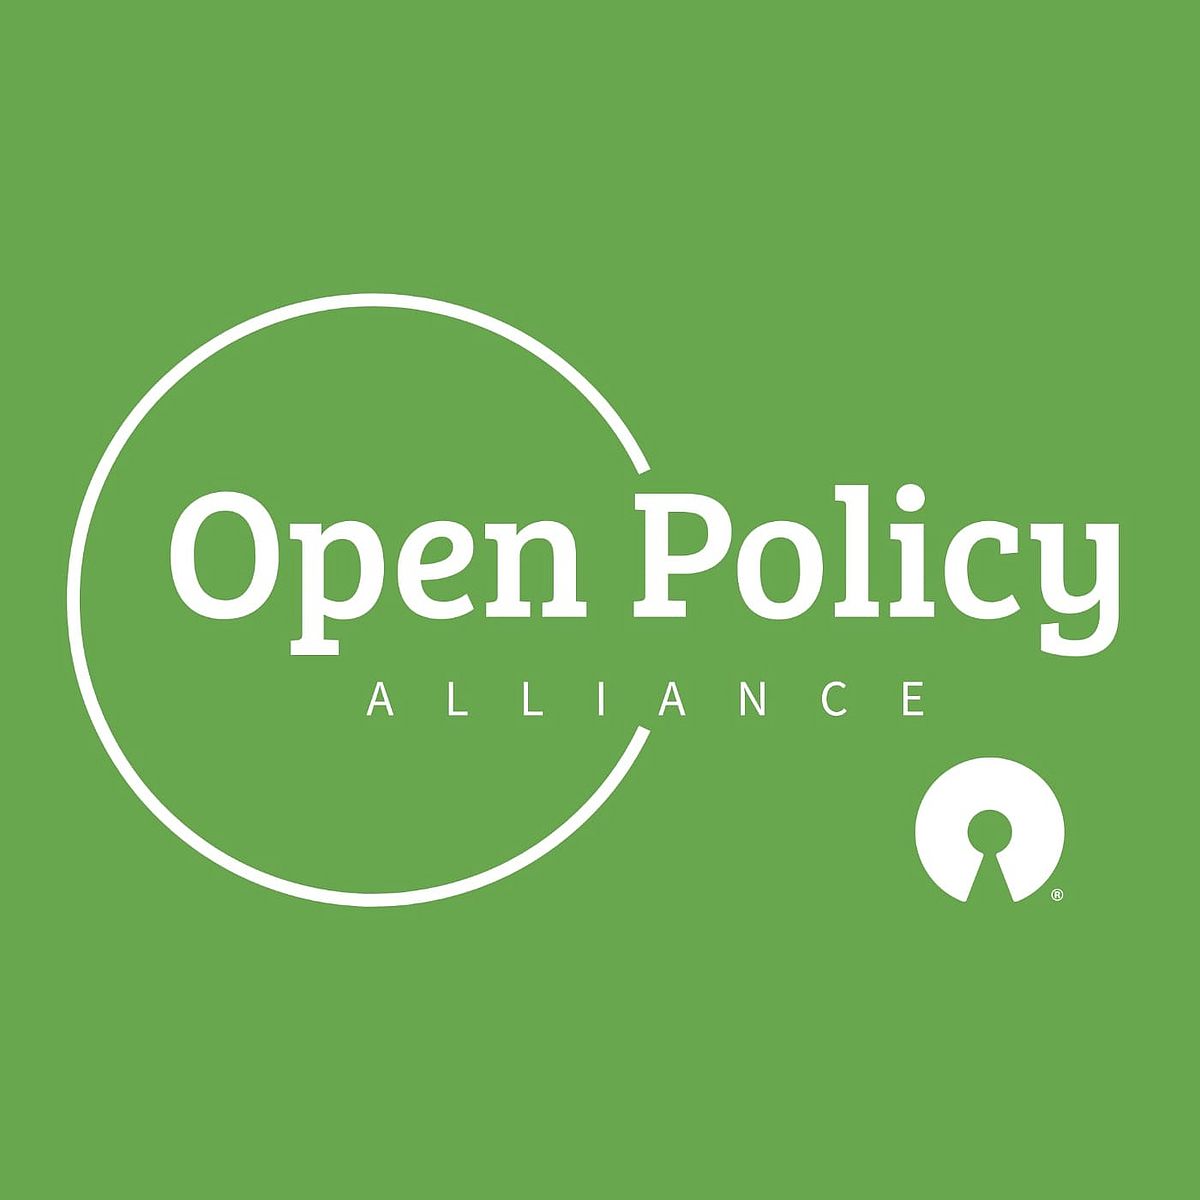 Open Policy Alliance logo. White circle and words on green background.